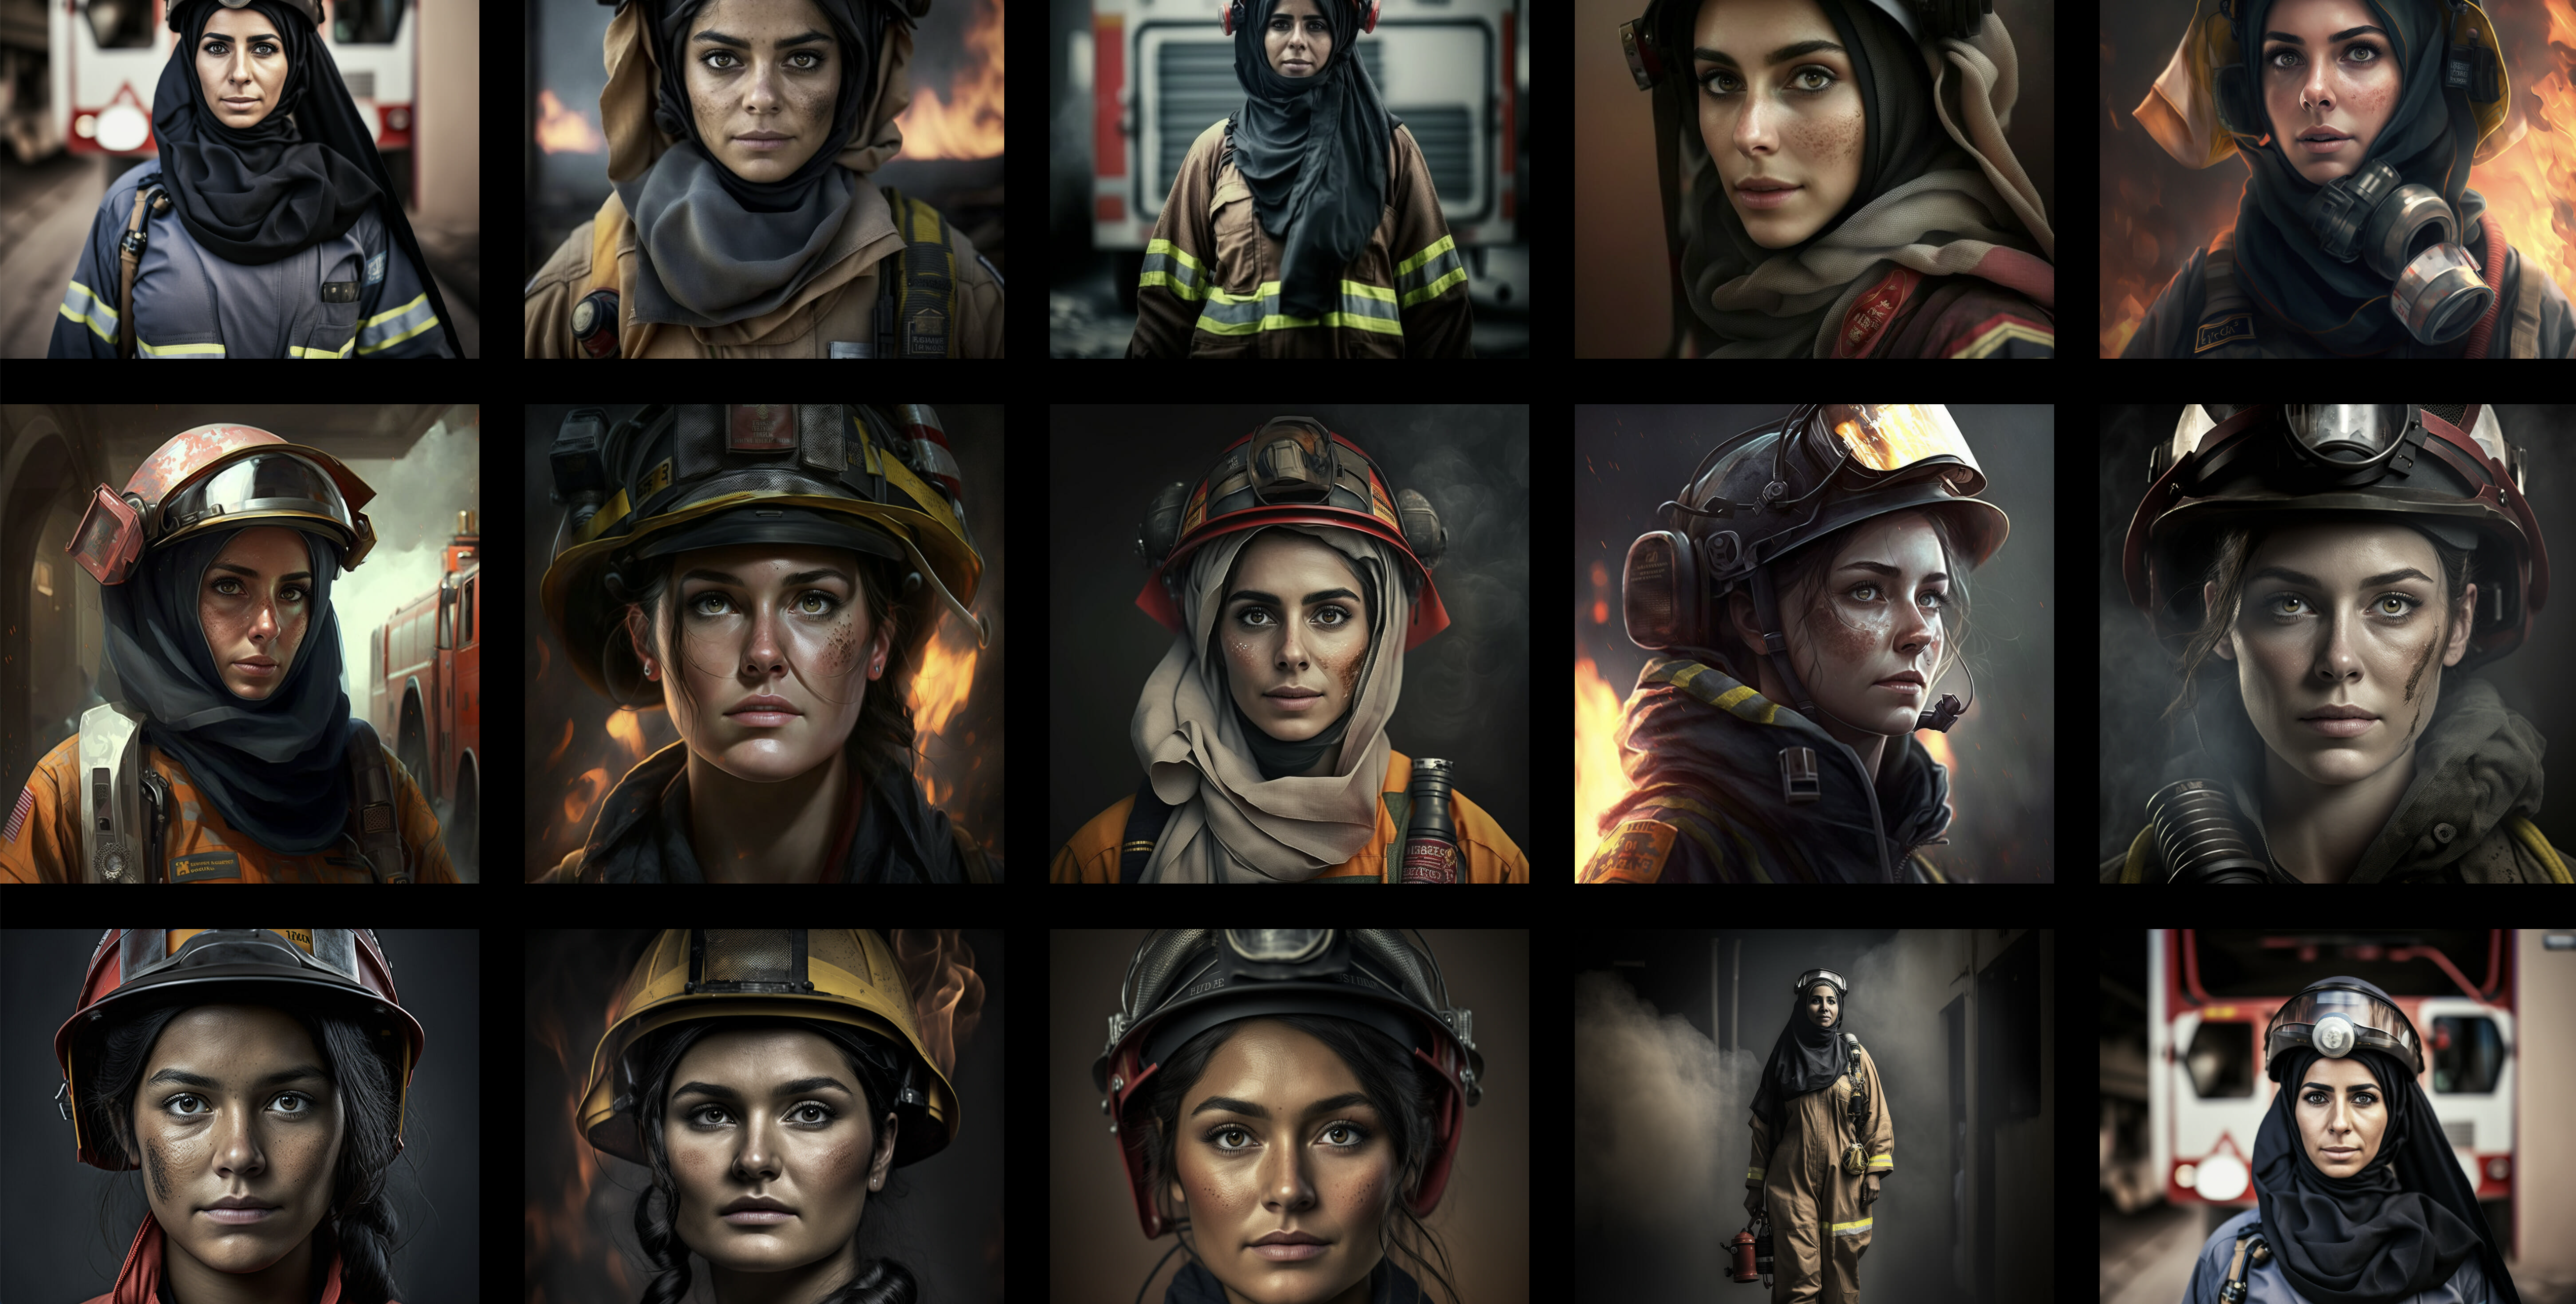 Fixing the bAIs- firefighter images